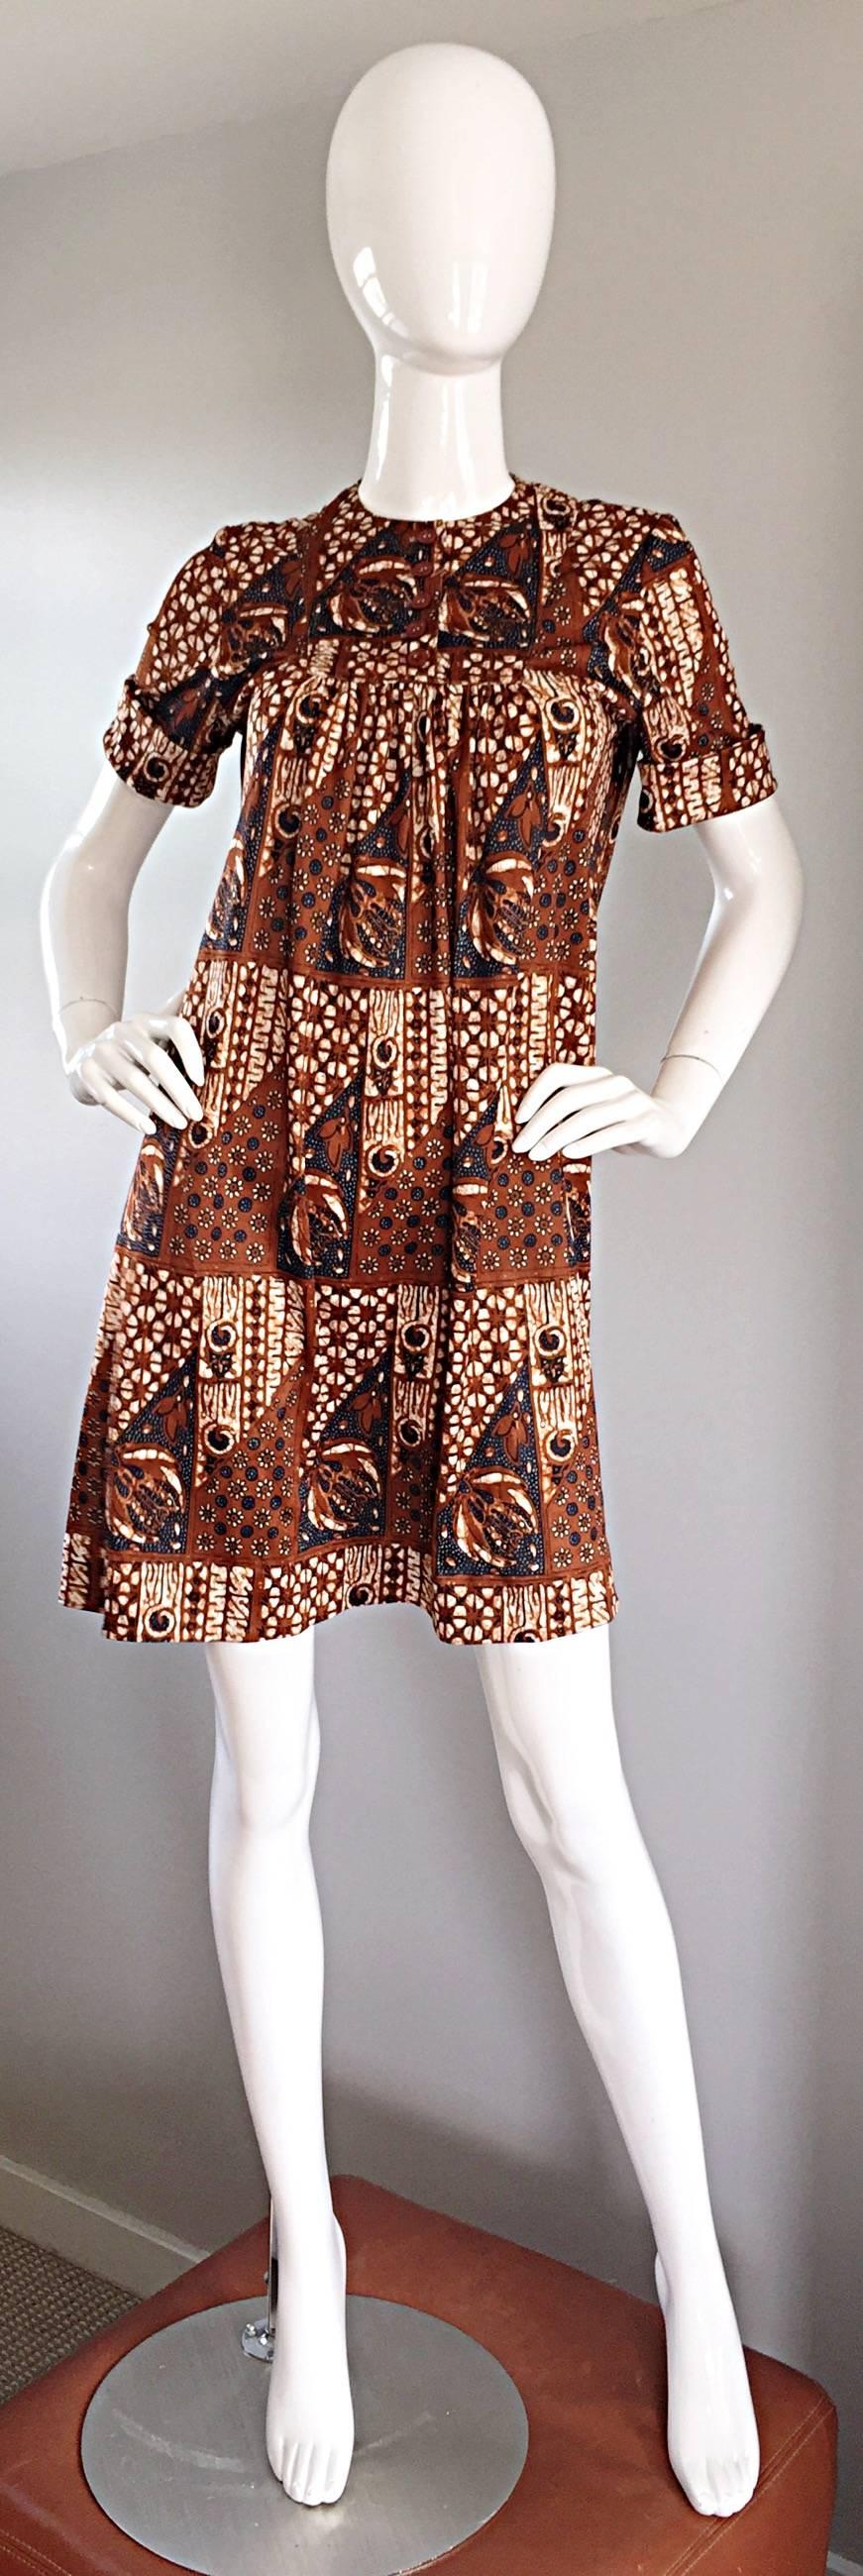 Rare and Wonderful vintage JOSEPH MAGNIN 60s tribal batik print 'ethnic' A-Line / trapeze dress! Flattering empire fit, with an equally impressive print. Buttons up the bodice, and looks great buttoned, or left unbuttoned. Zips up the back. Great